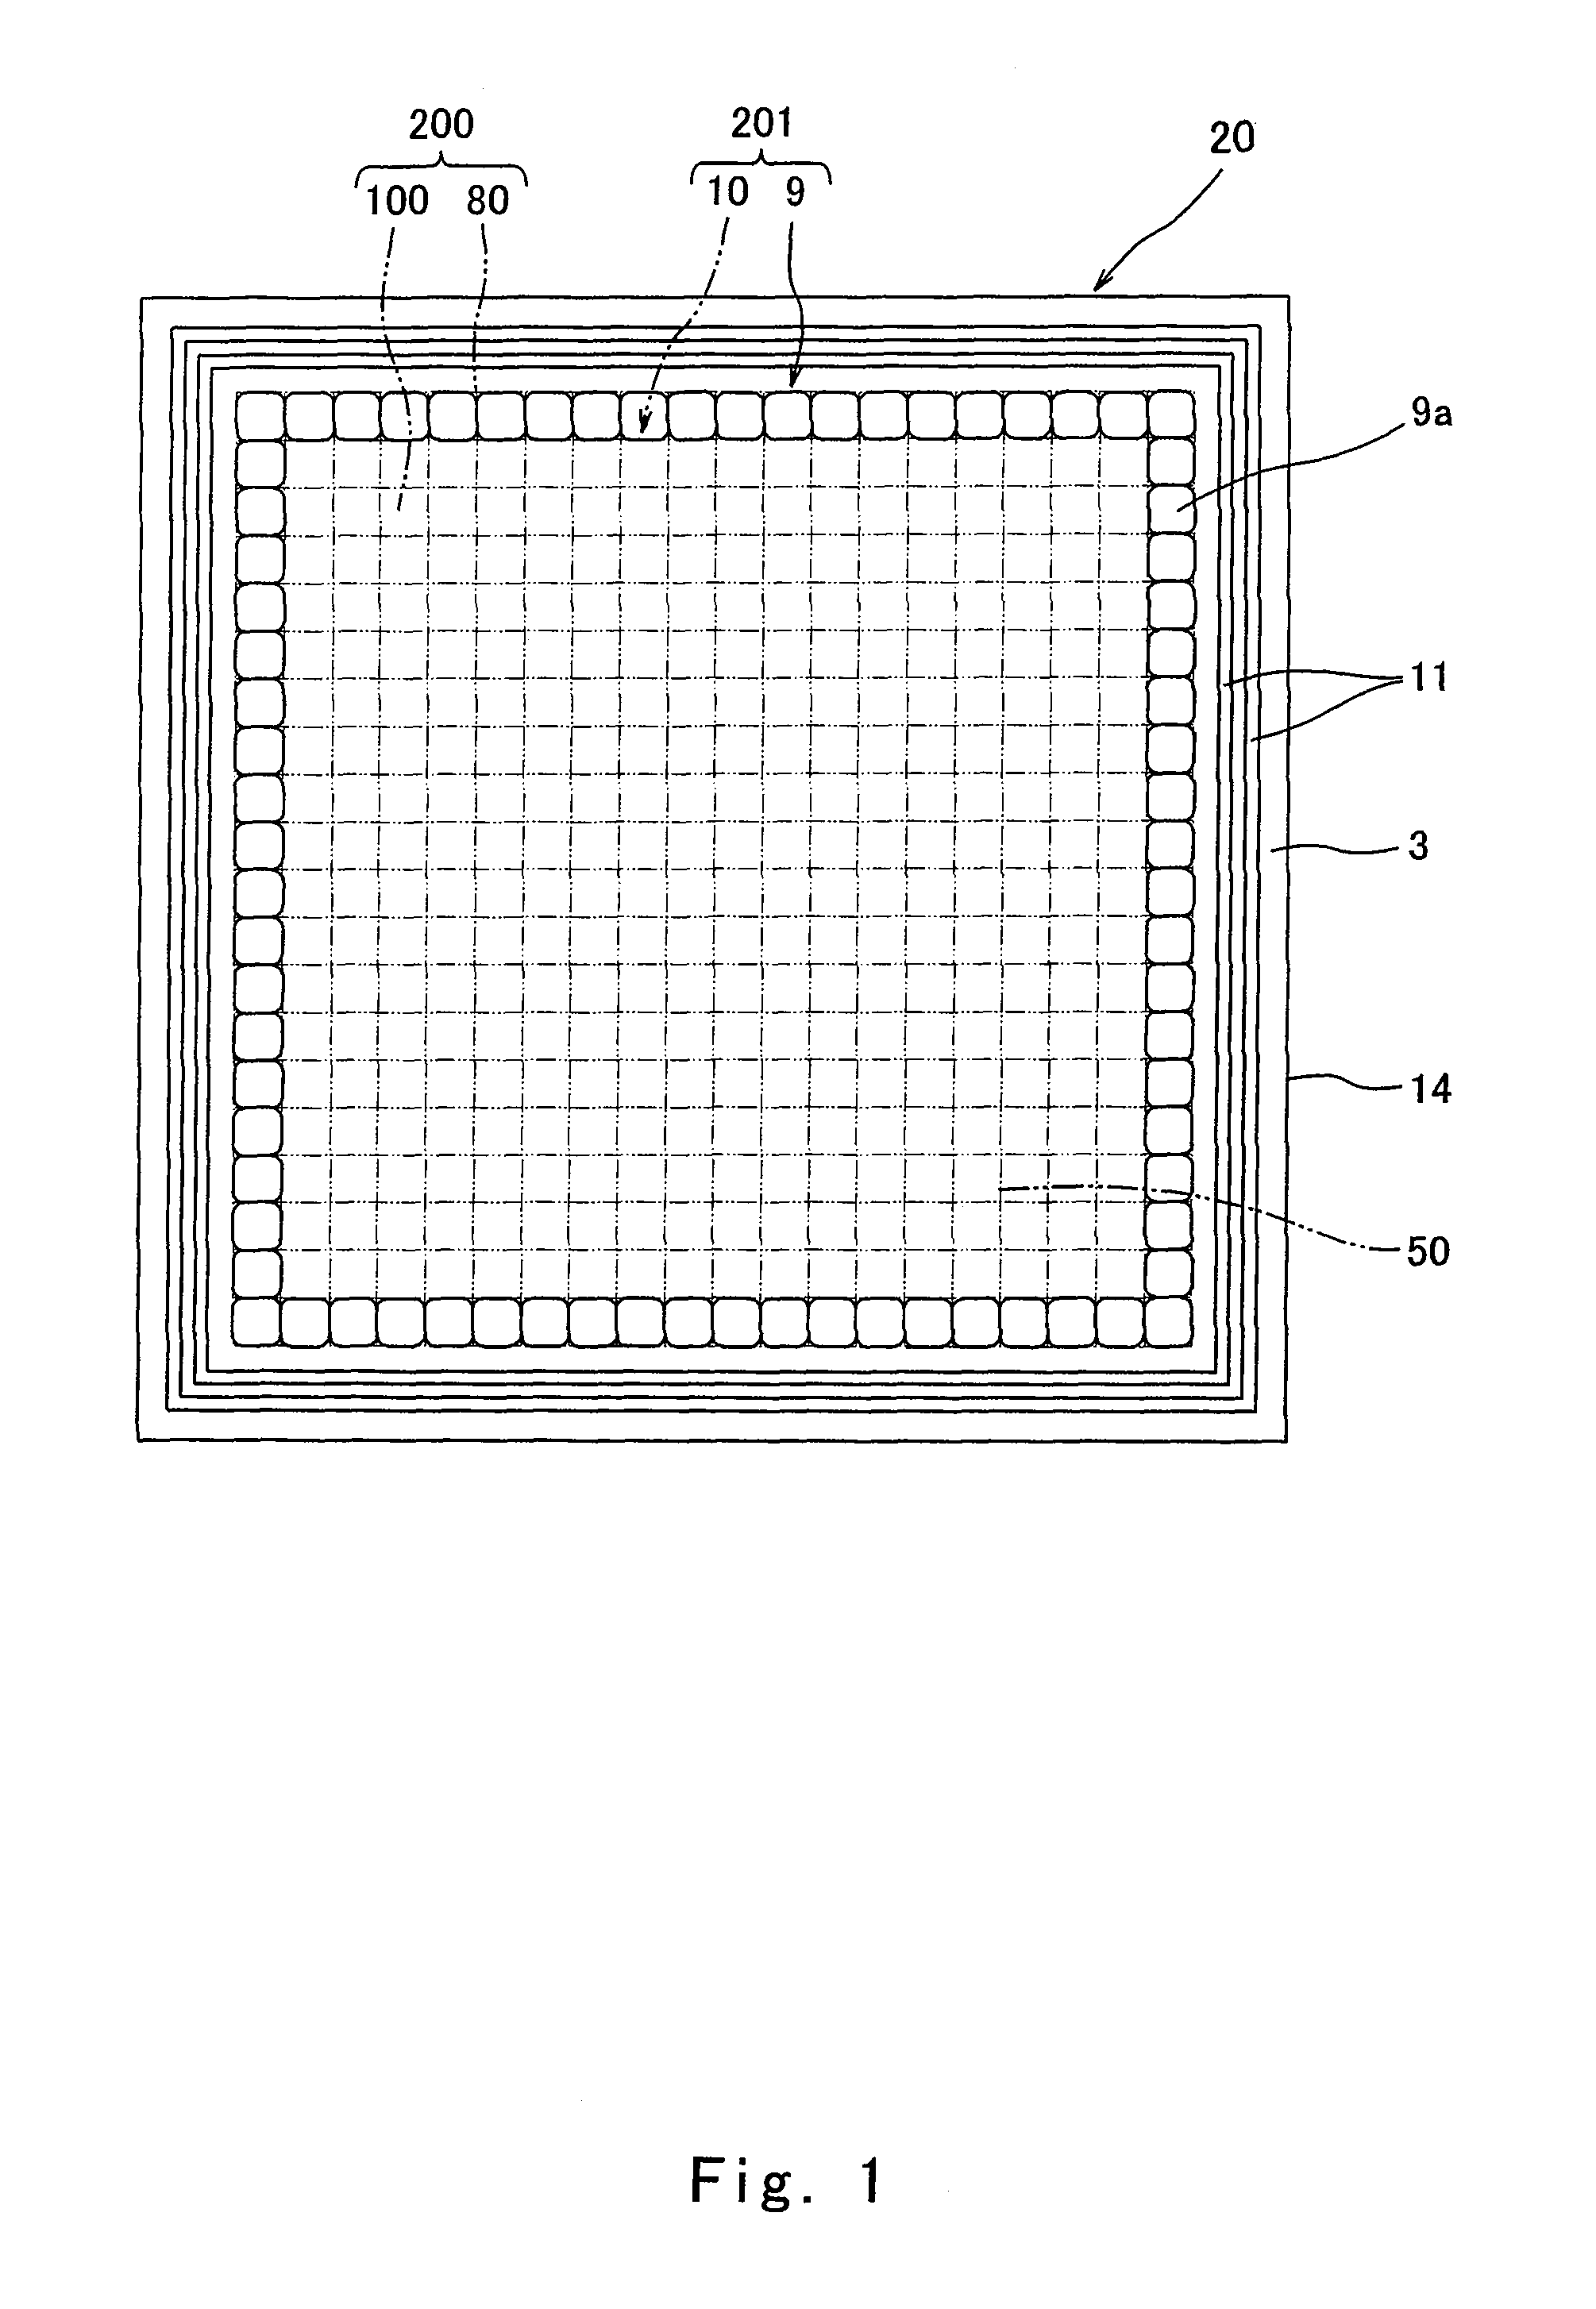 Semiconductor element and electrical apparatus